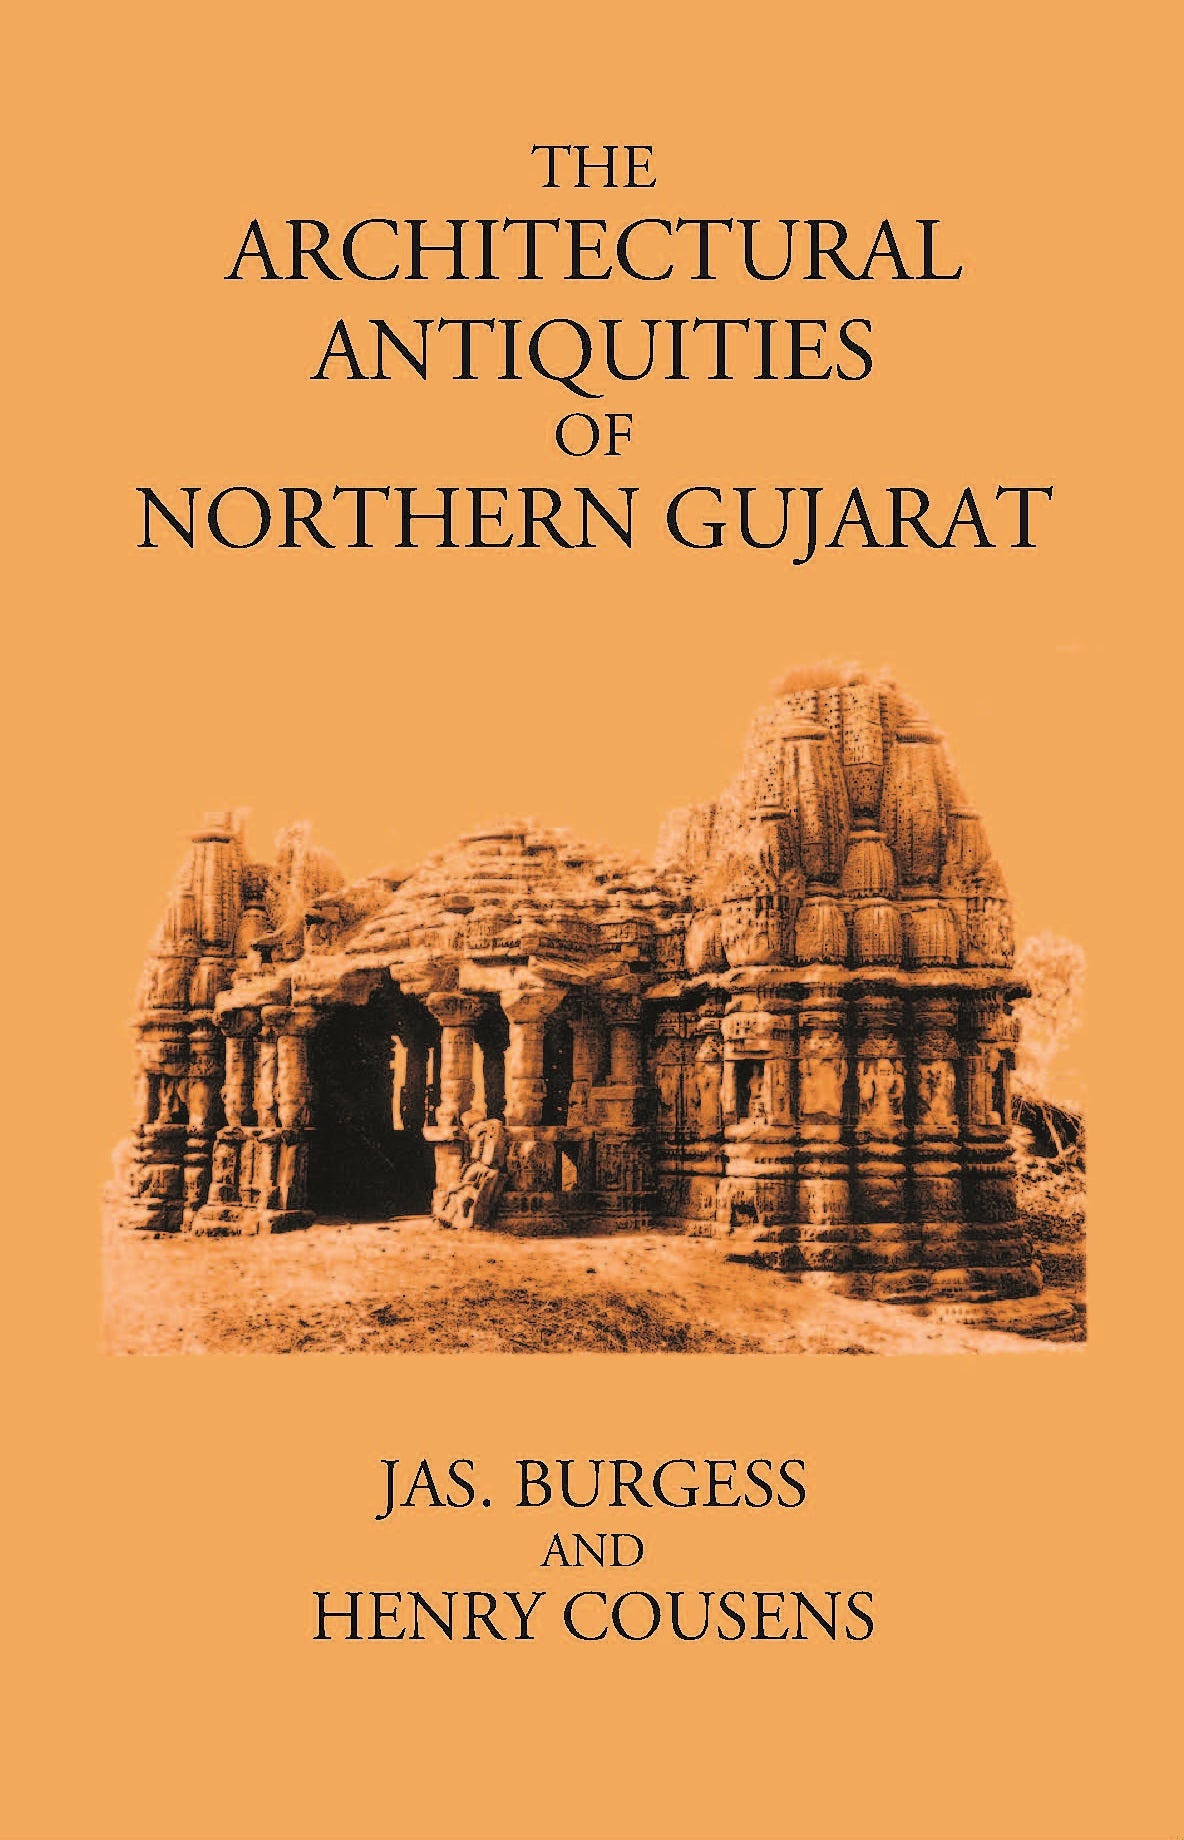 THE ARCHITECTURAL ANTIQUITIES OF NORTHERN GUJARAT